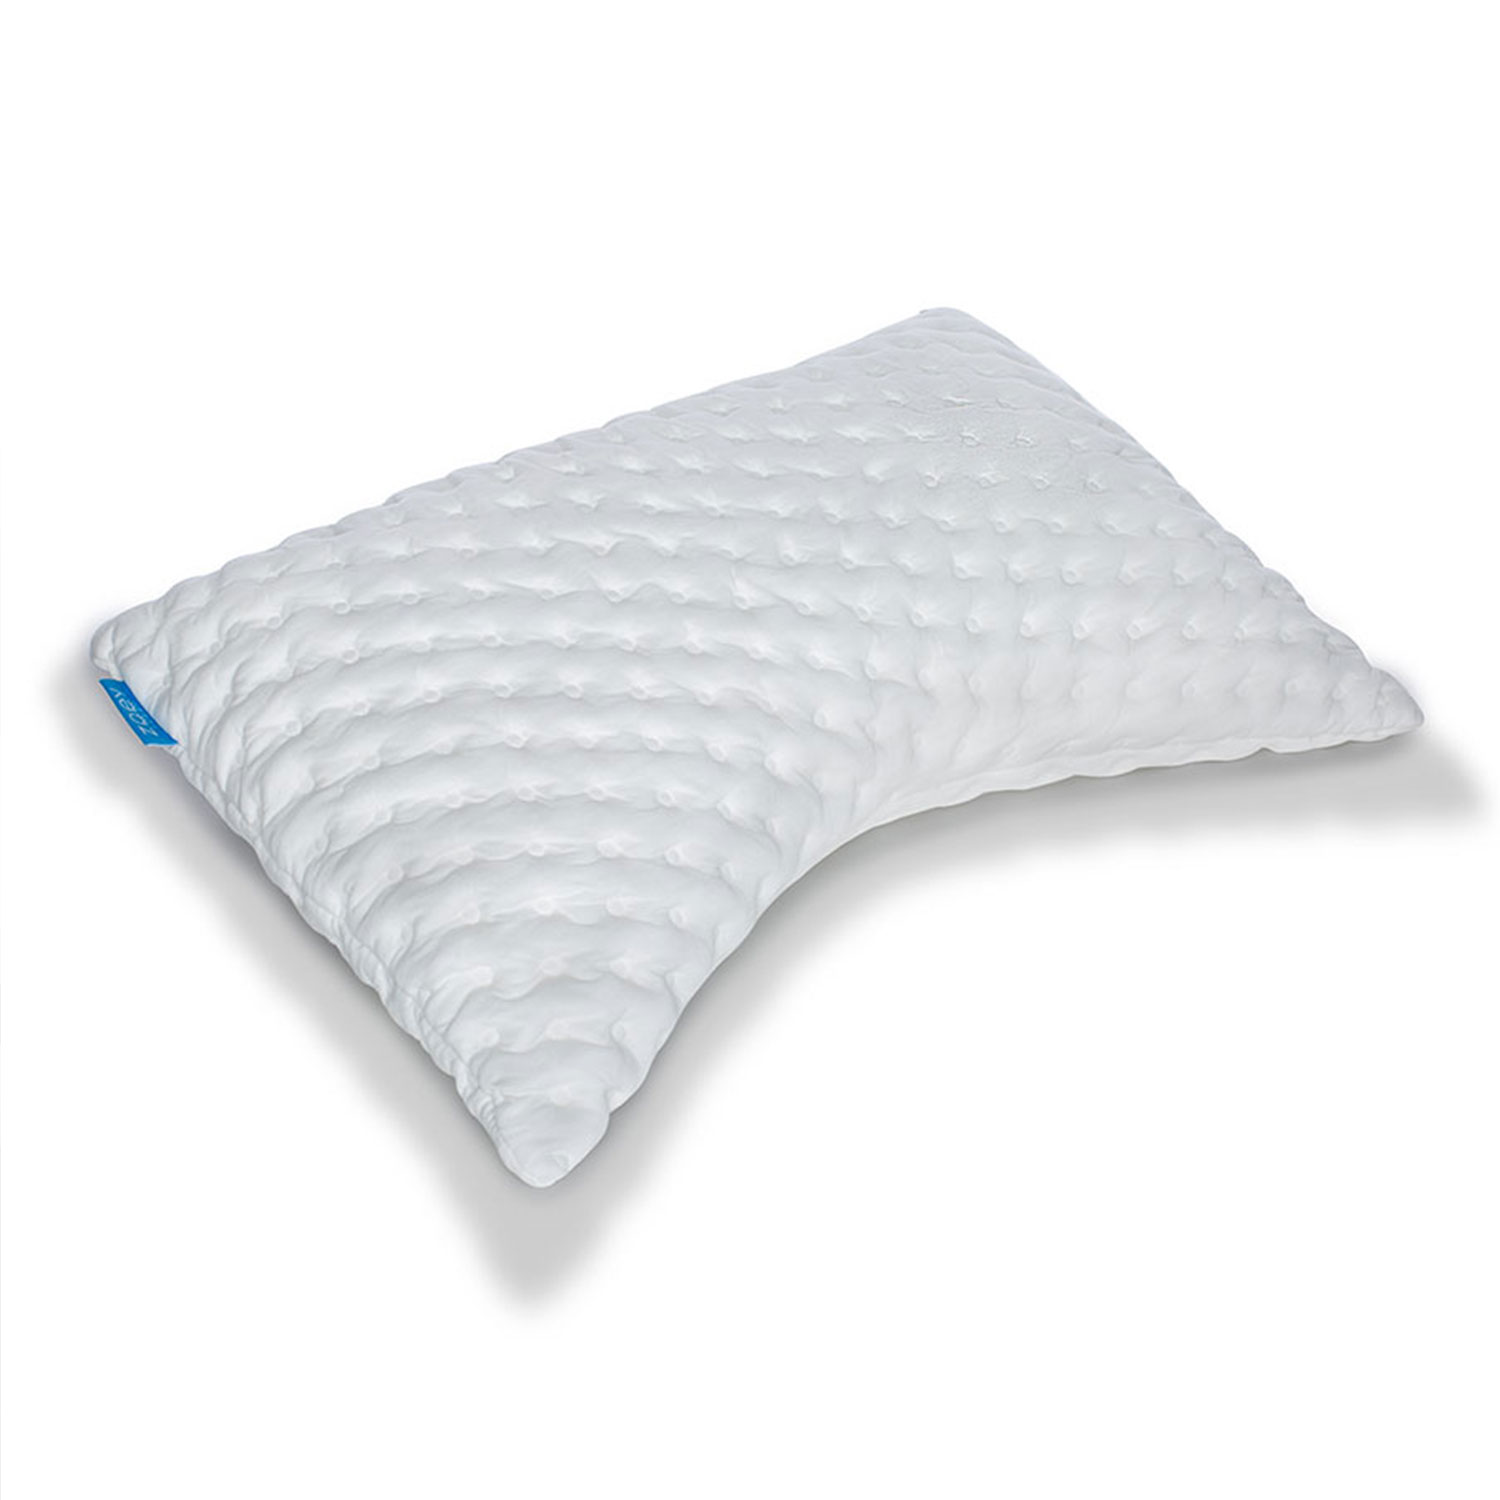 zoey sleep pillow, mother's day gift